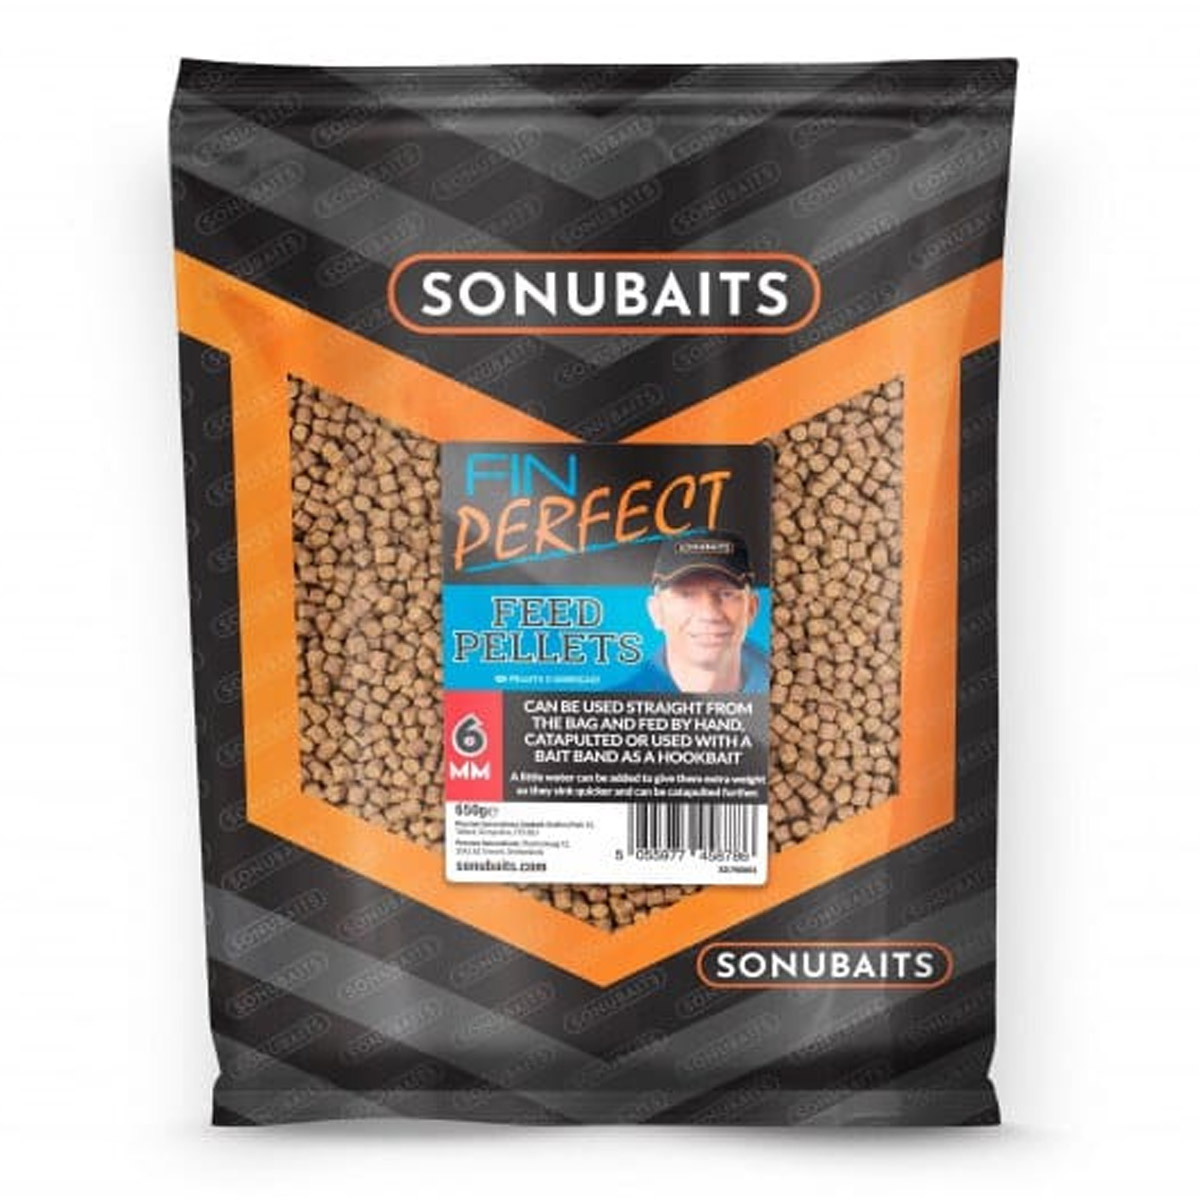 Sonubaits Fin Perfect Feed Pellets -  6 mm